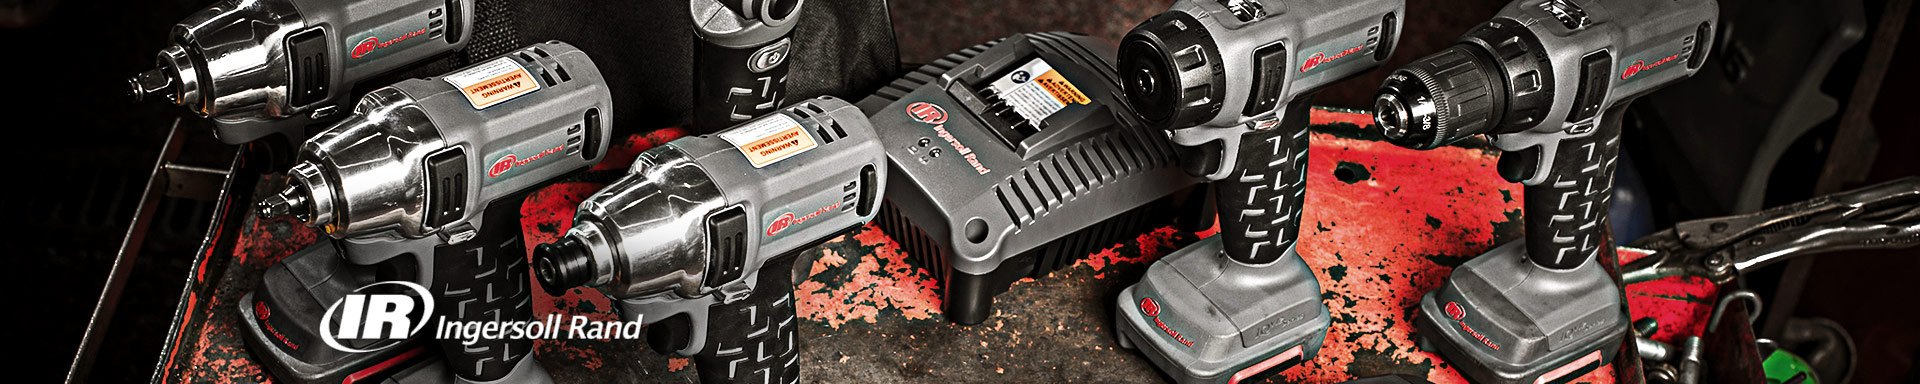 Ingersoll Rand Air Specialty Tools